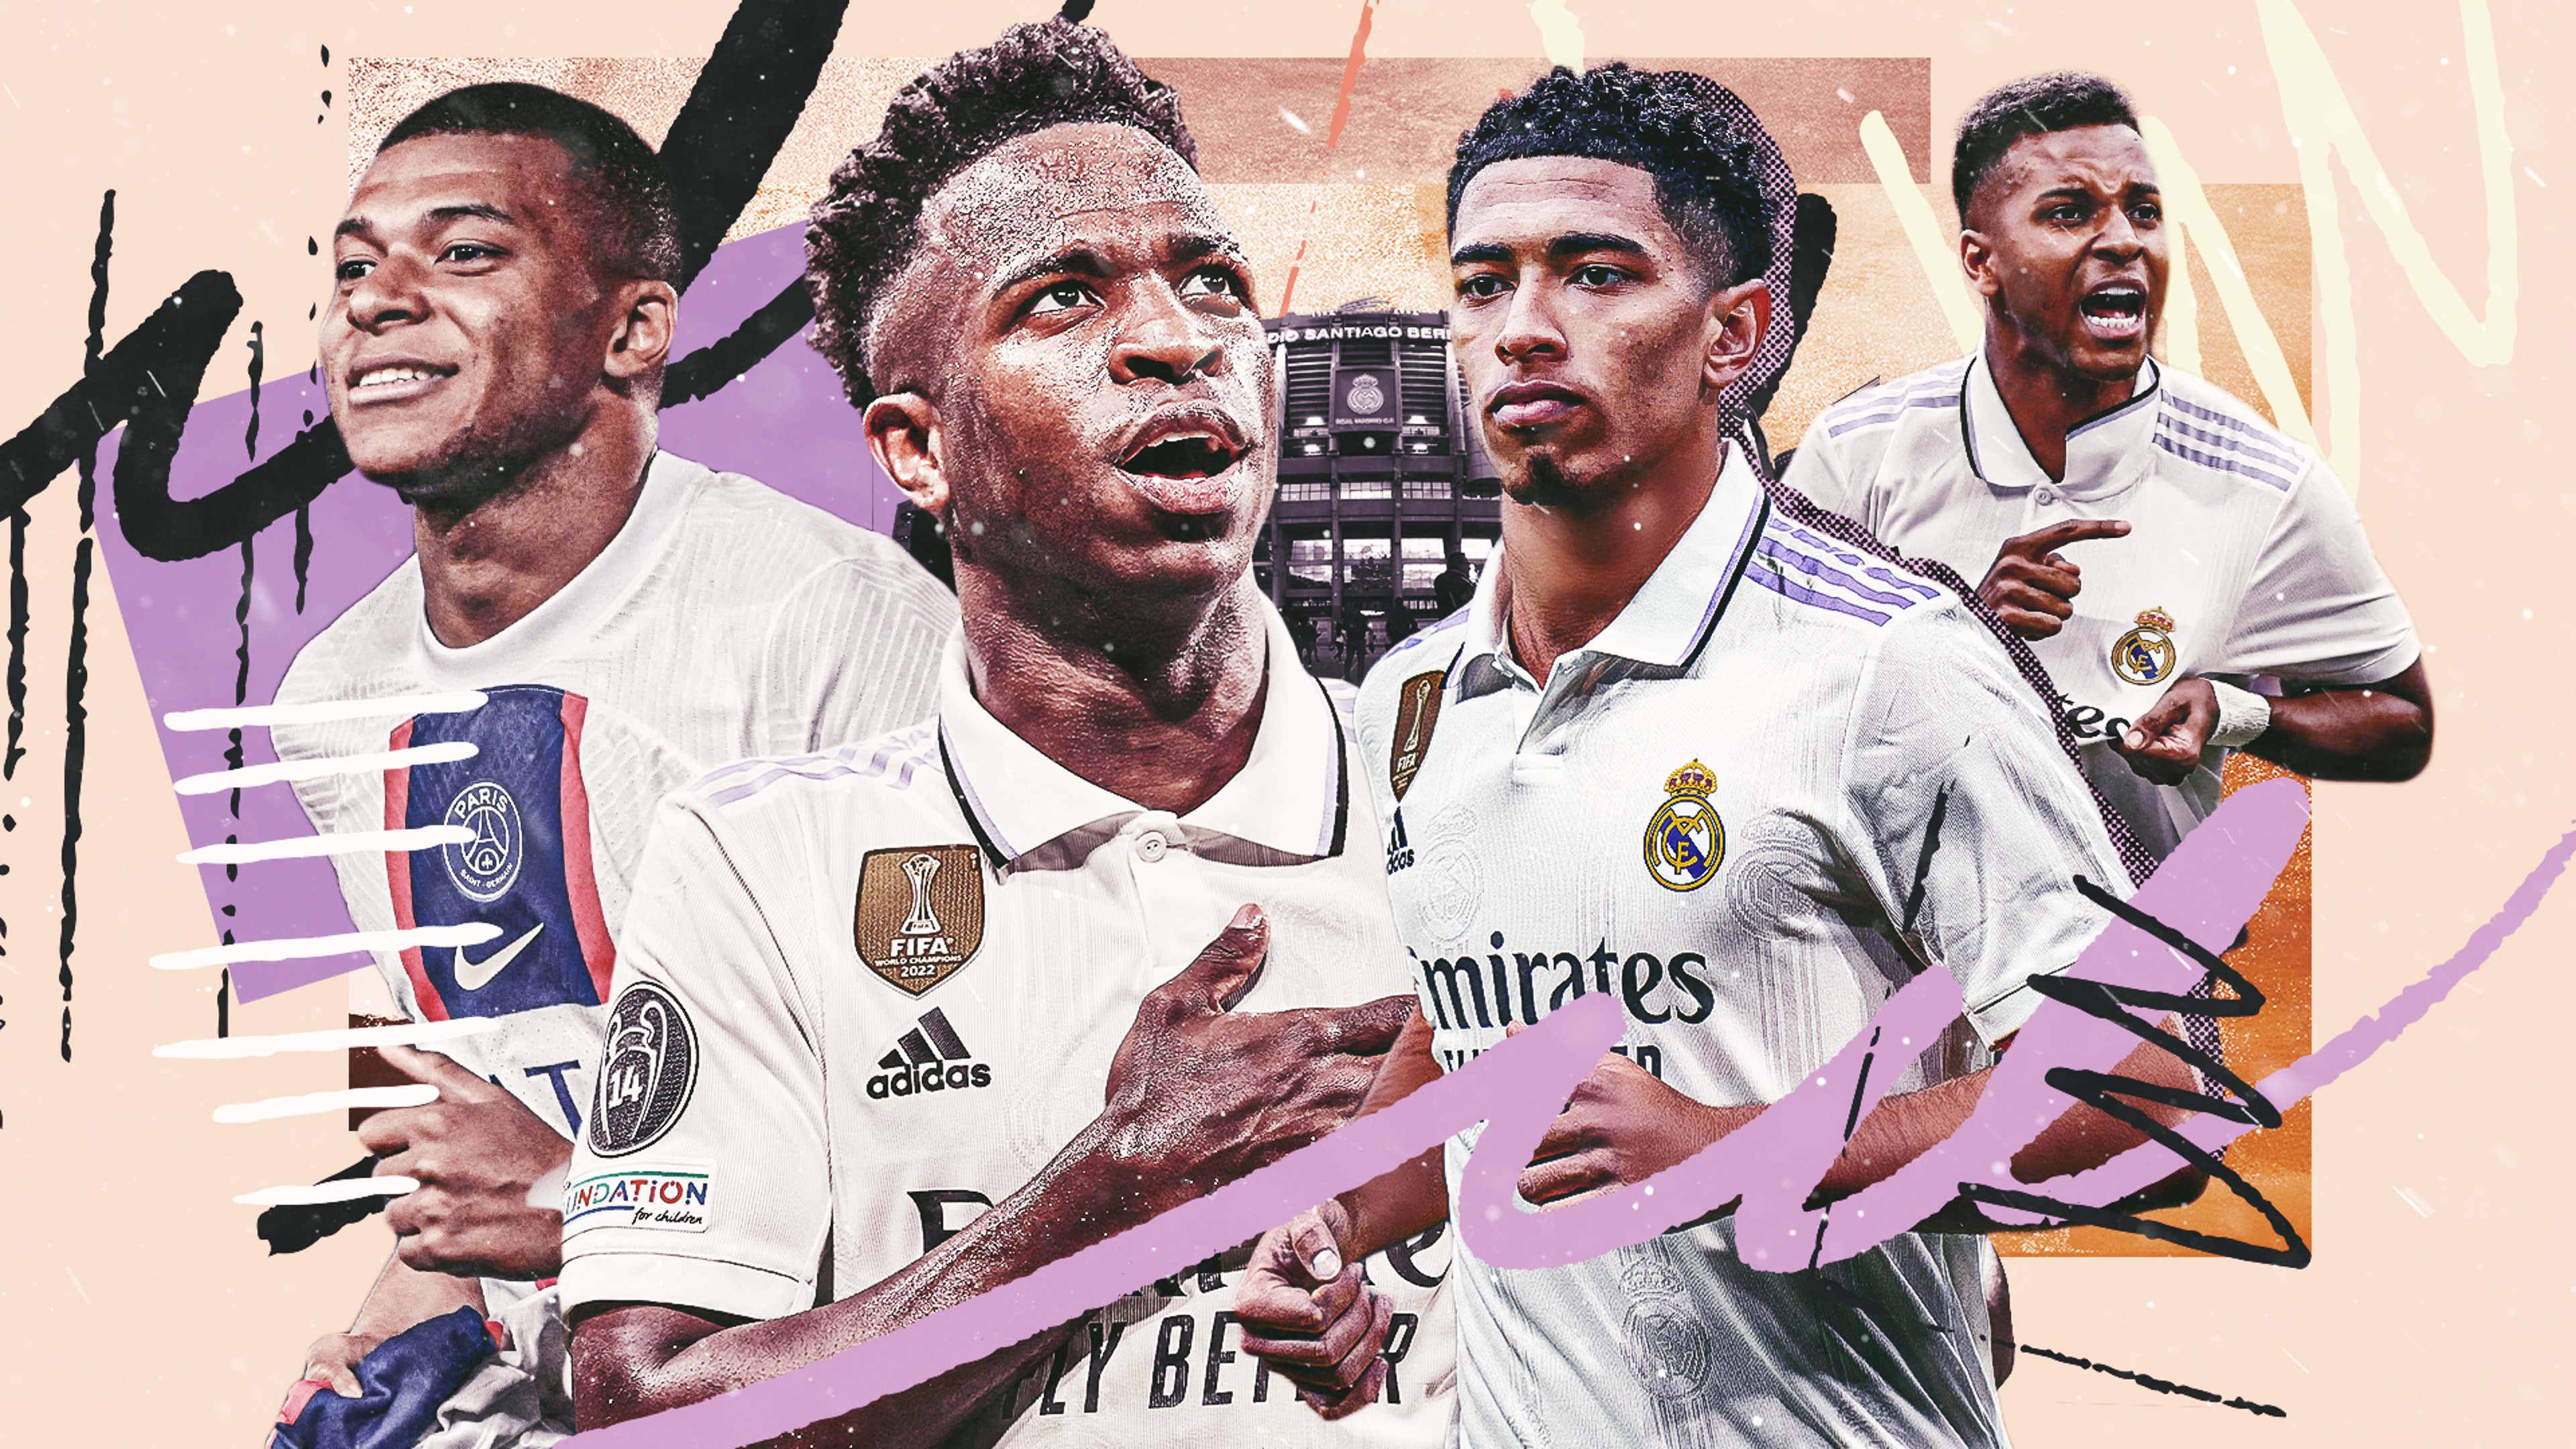 Real Madrid 2023: Jude Bellingham, Kylian Mbappe, Vinicius Jr and the scary  line-up set to lead Los Blancos towards another decade of domination